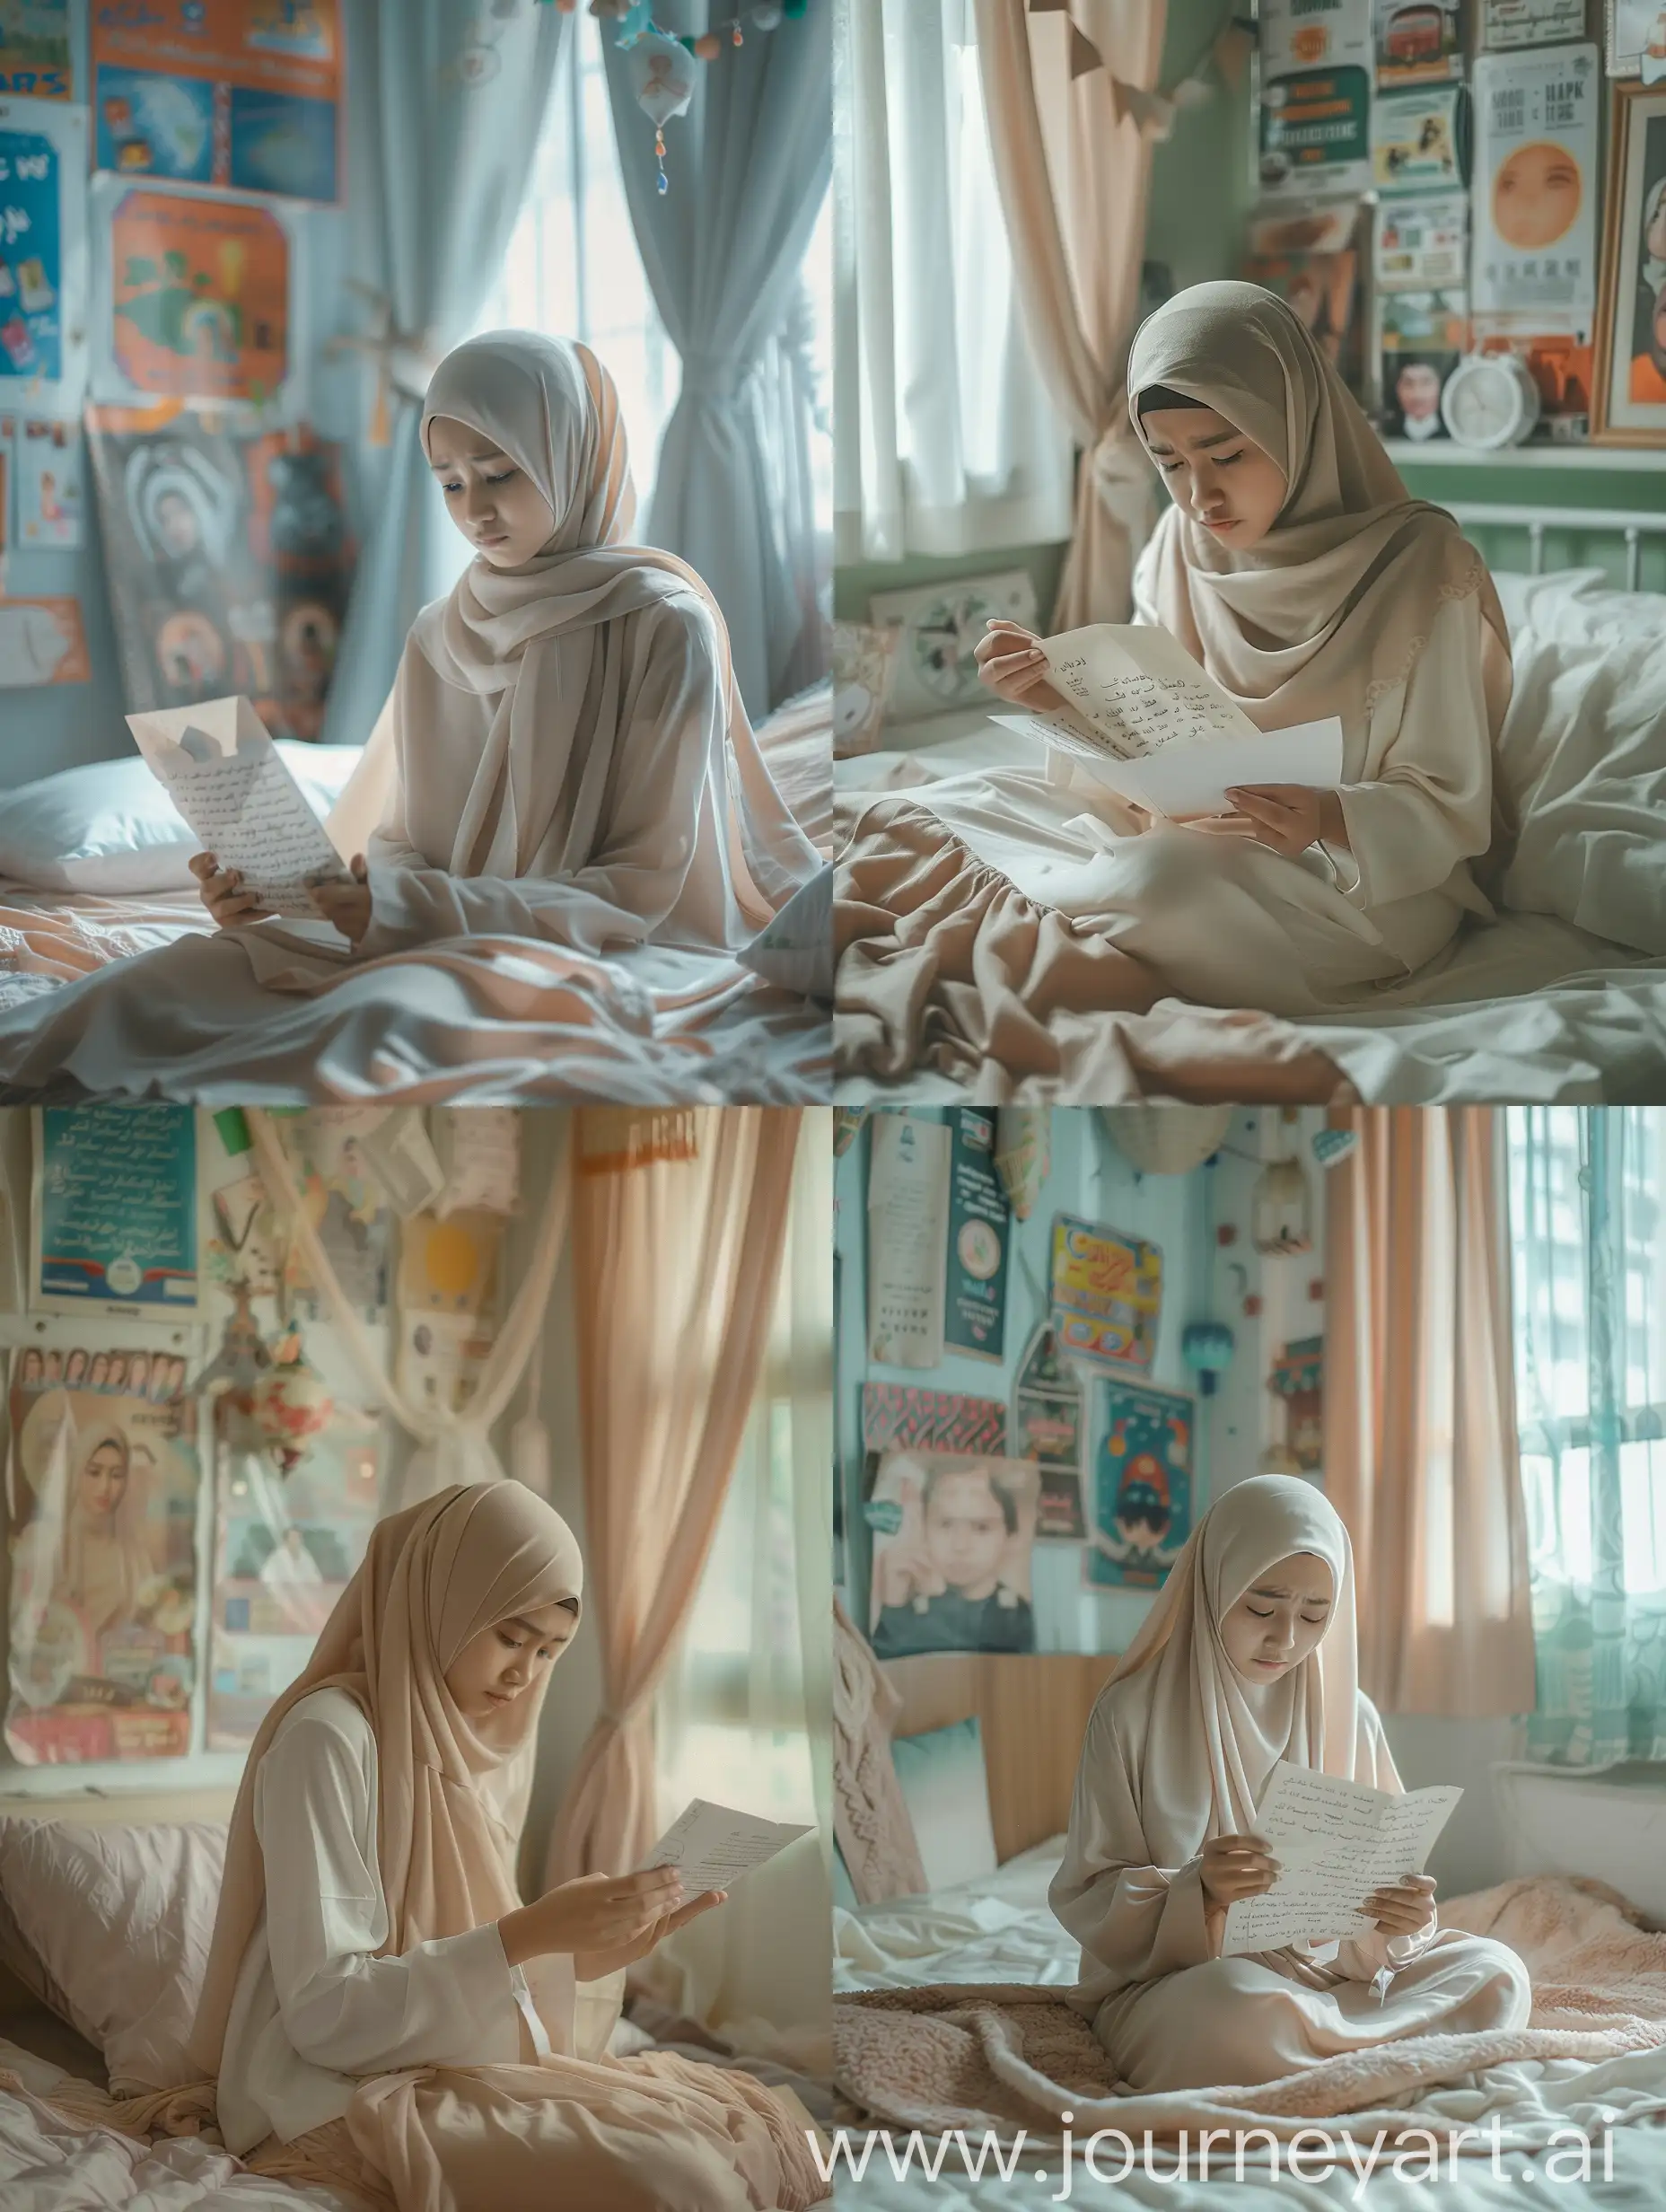 Beautiful Asian Muslim hijab girl sitting on the bed, she is sad, reading a letter in her hand, nostalgic room with posters and decorations, soft color tones, soft natural light through thin curtains,detail.real photo.